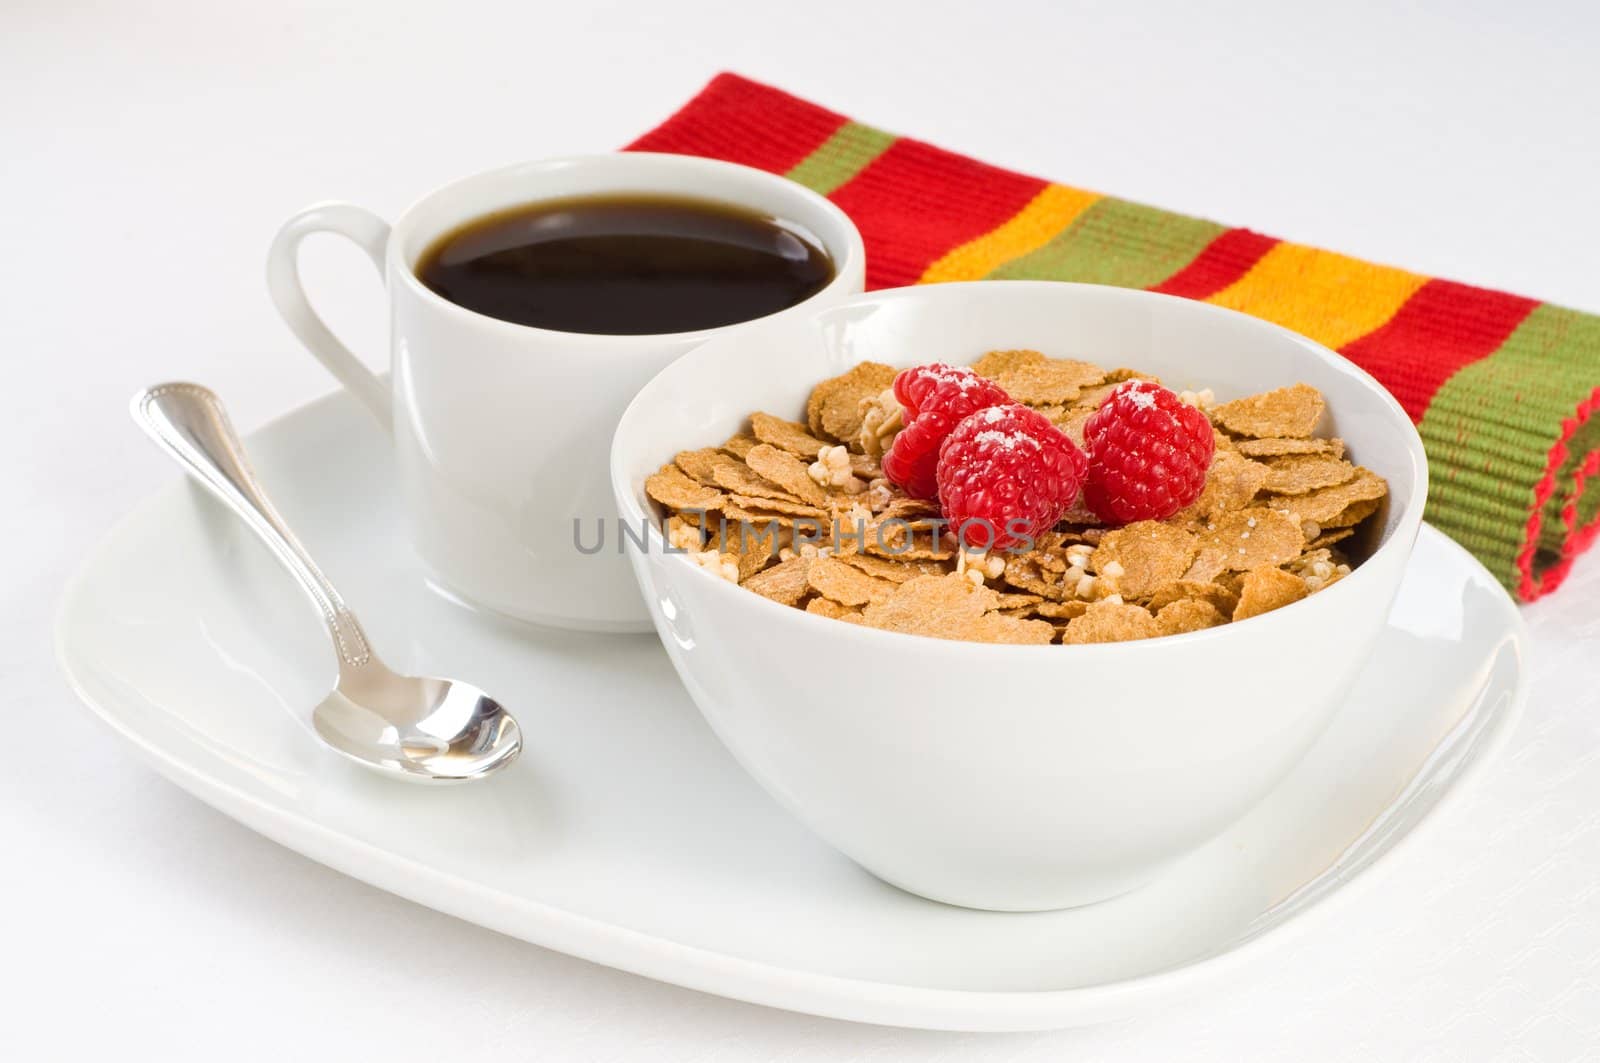 Bowl of cereal flakes and raspberries with coffee.